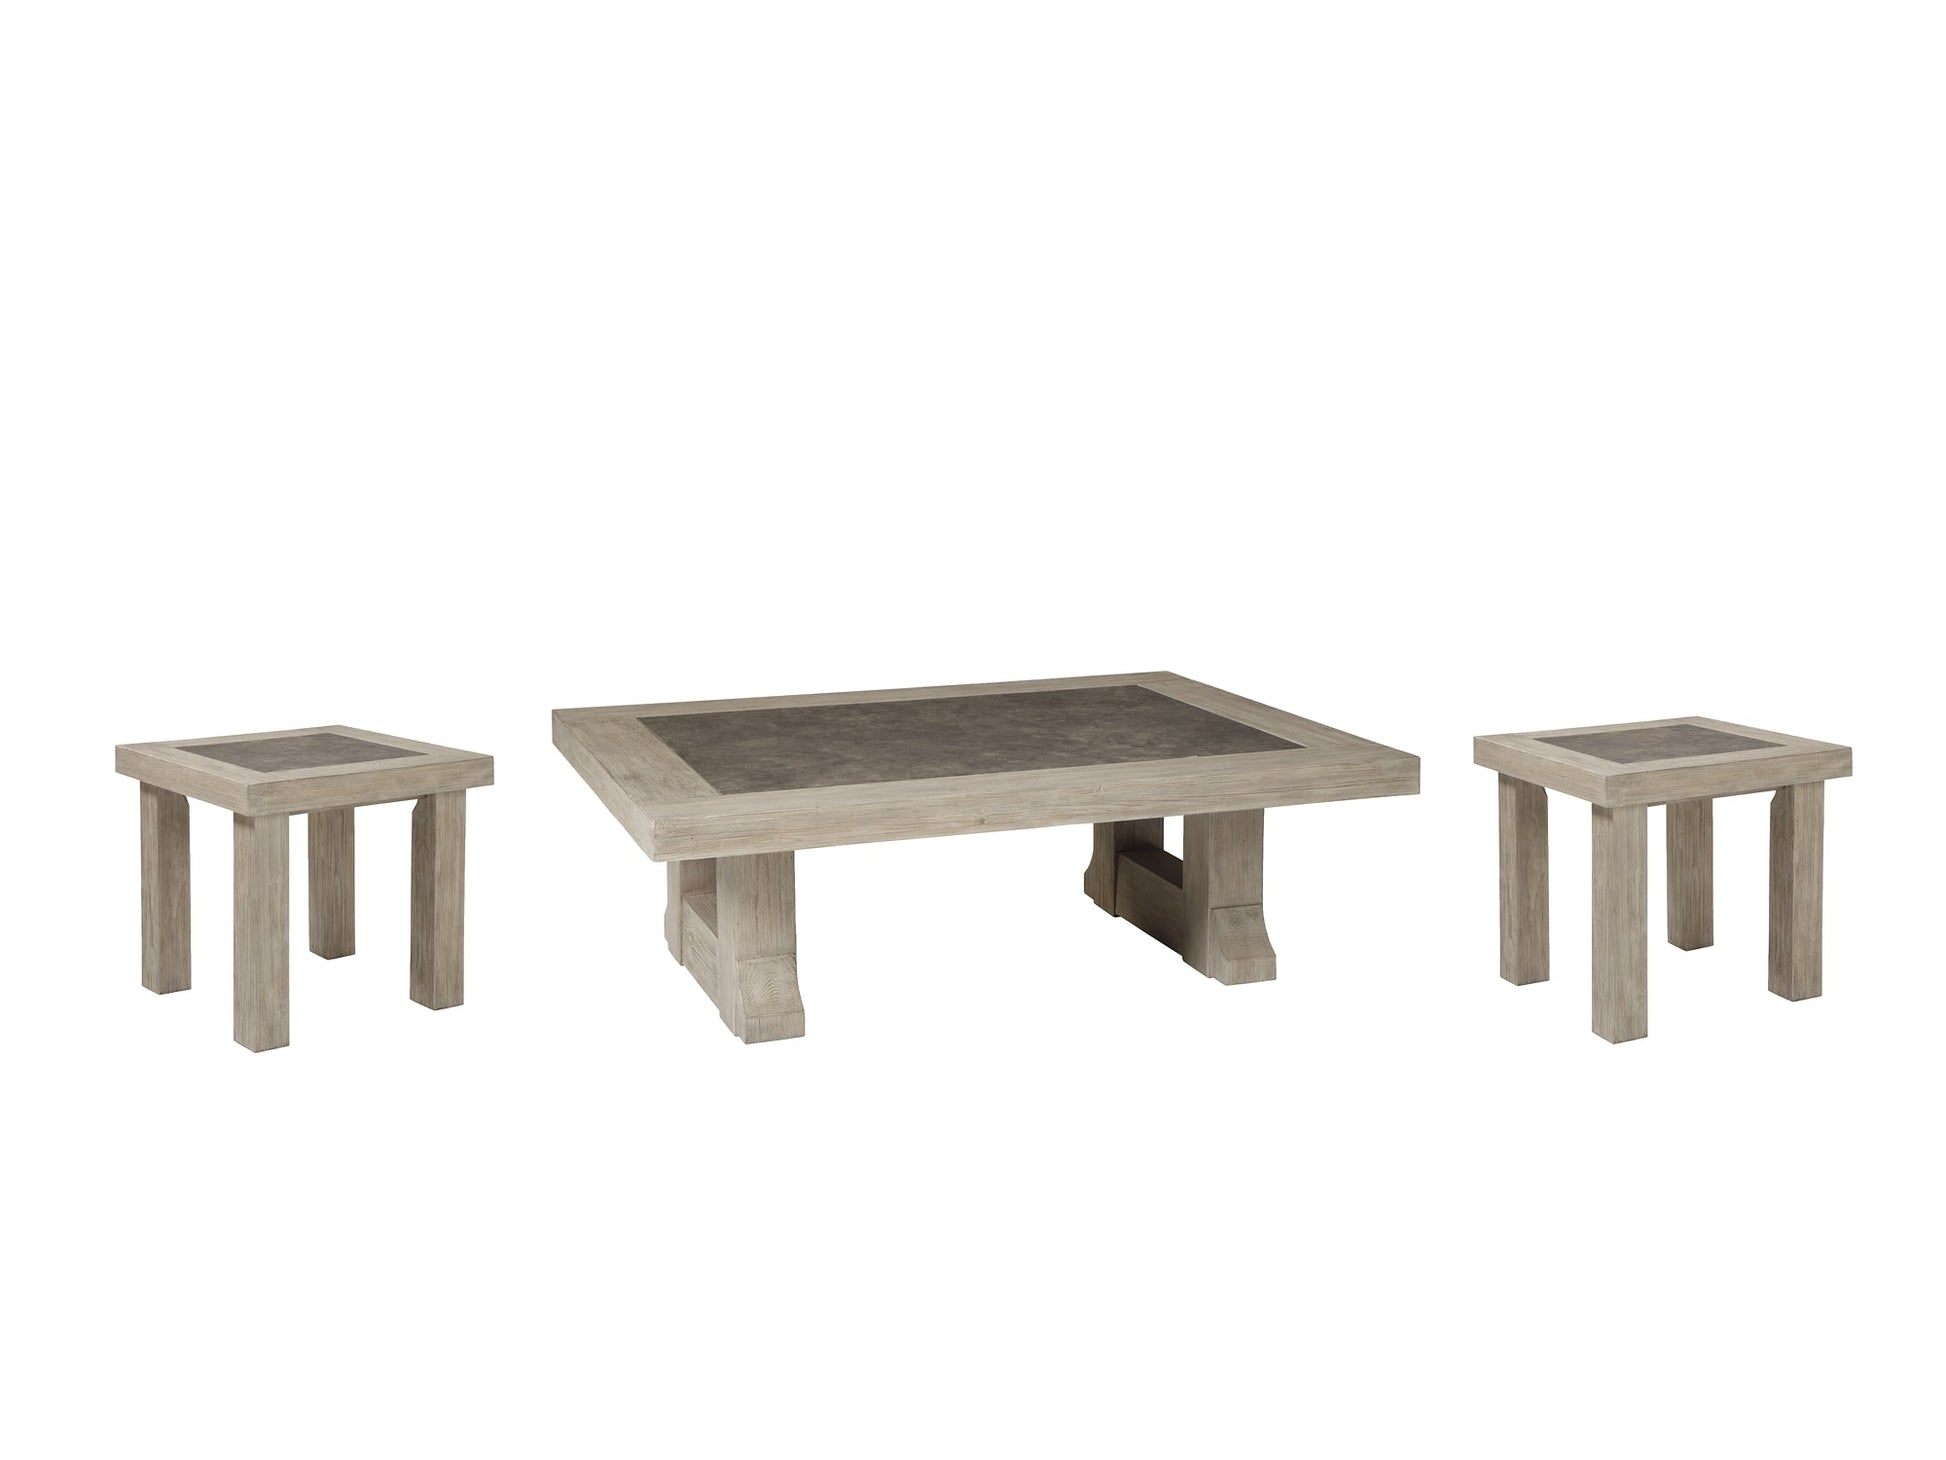 Hennington Coffee Table with 2 End Tables at Cloud 9 Mattress & Furniture furniture, home furnishing, home decor